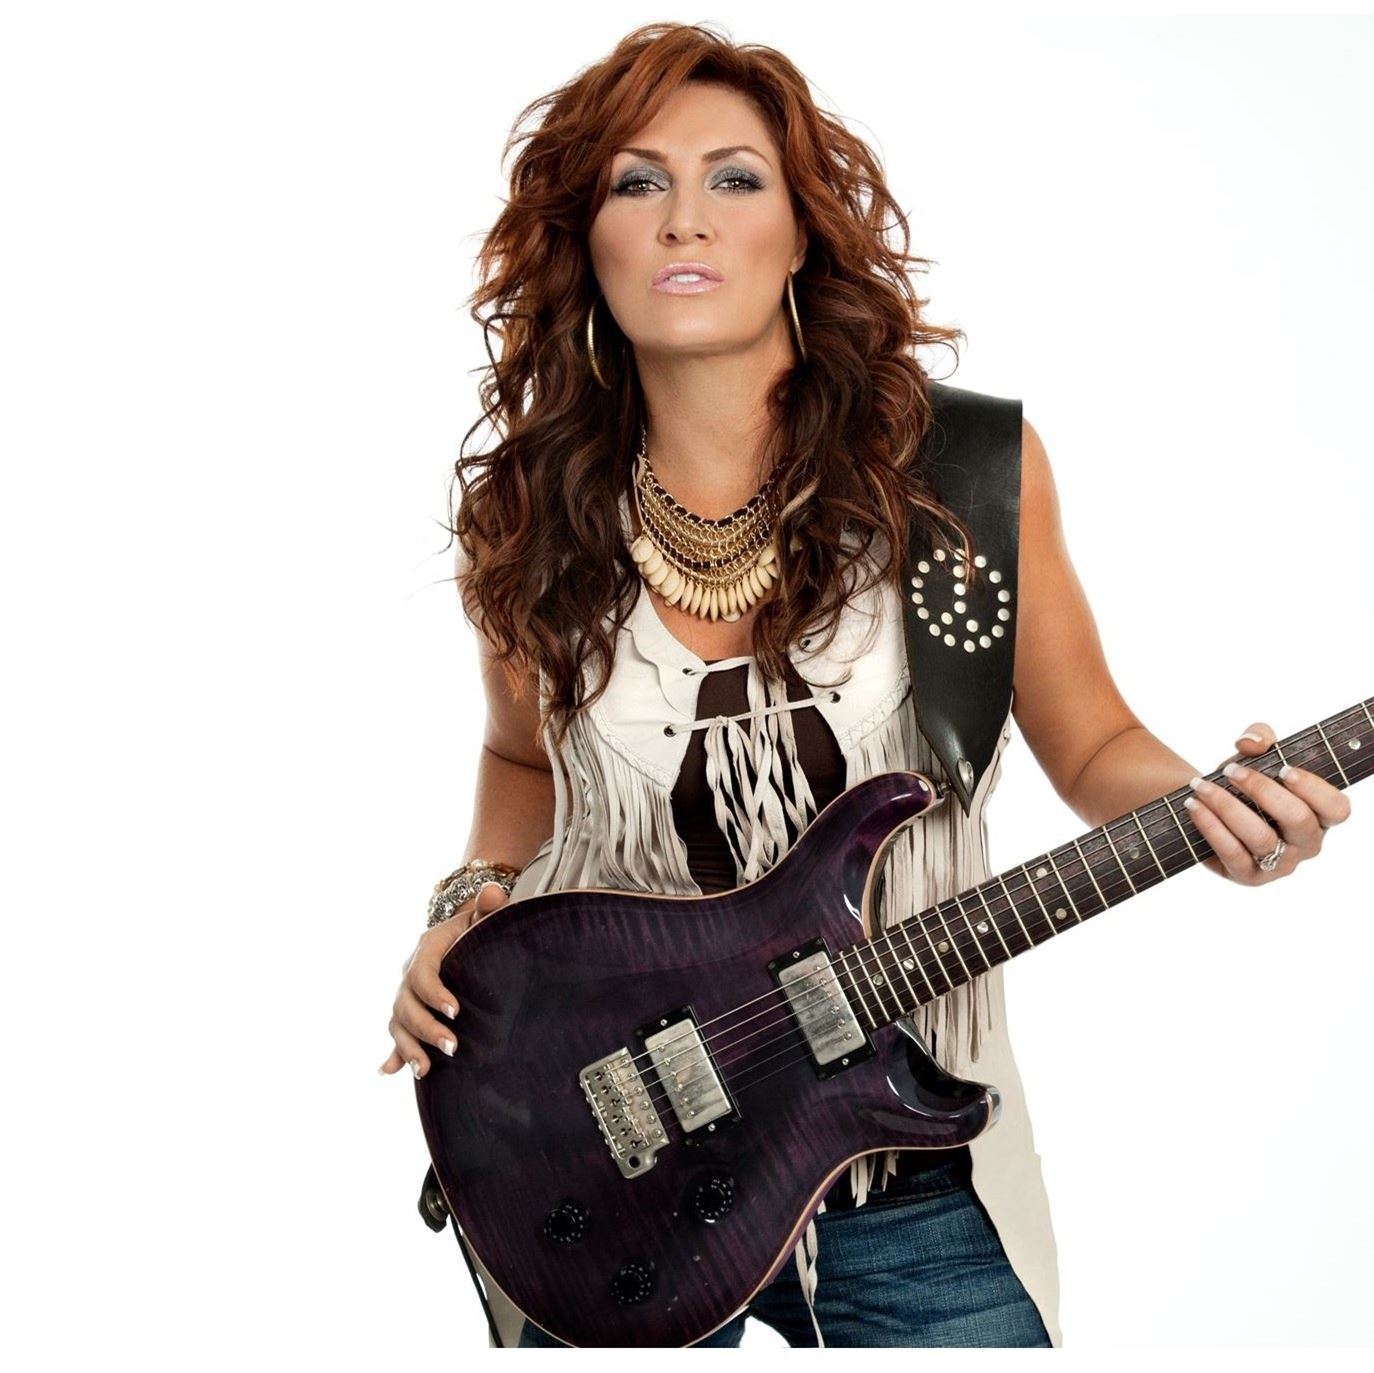 Jo Dee Messina with PRCA Xtreme Bulls